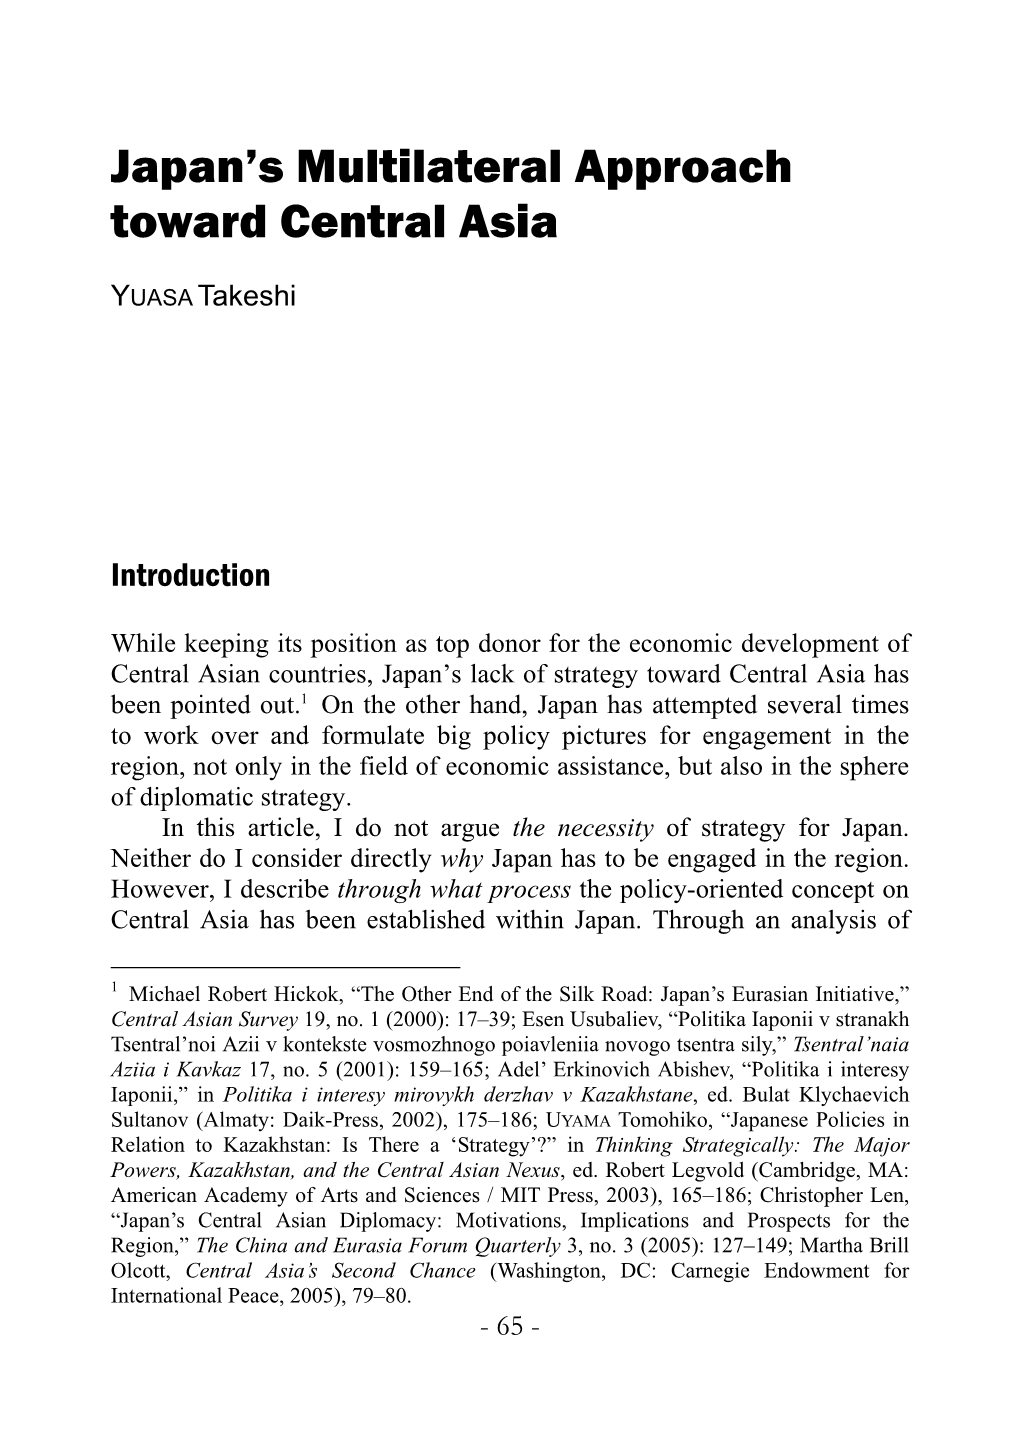 Japan's Multilateral Approach Toward Central Asia